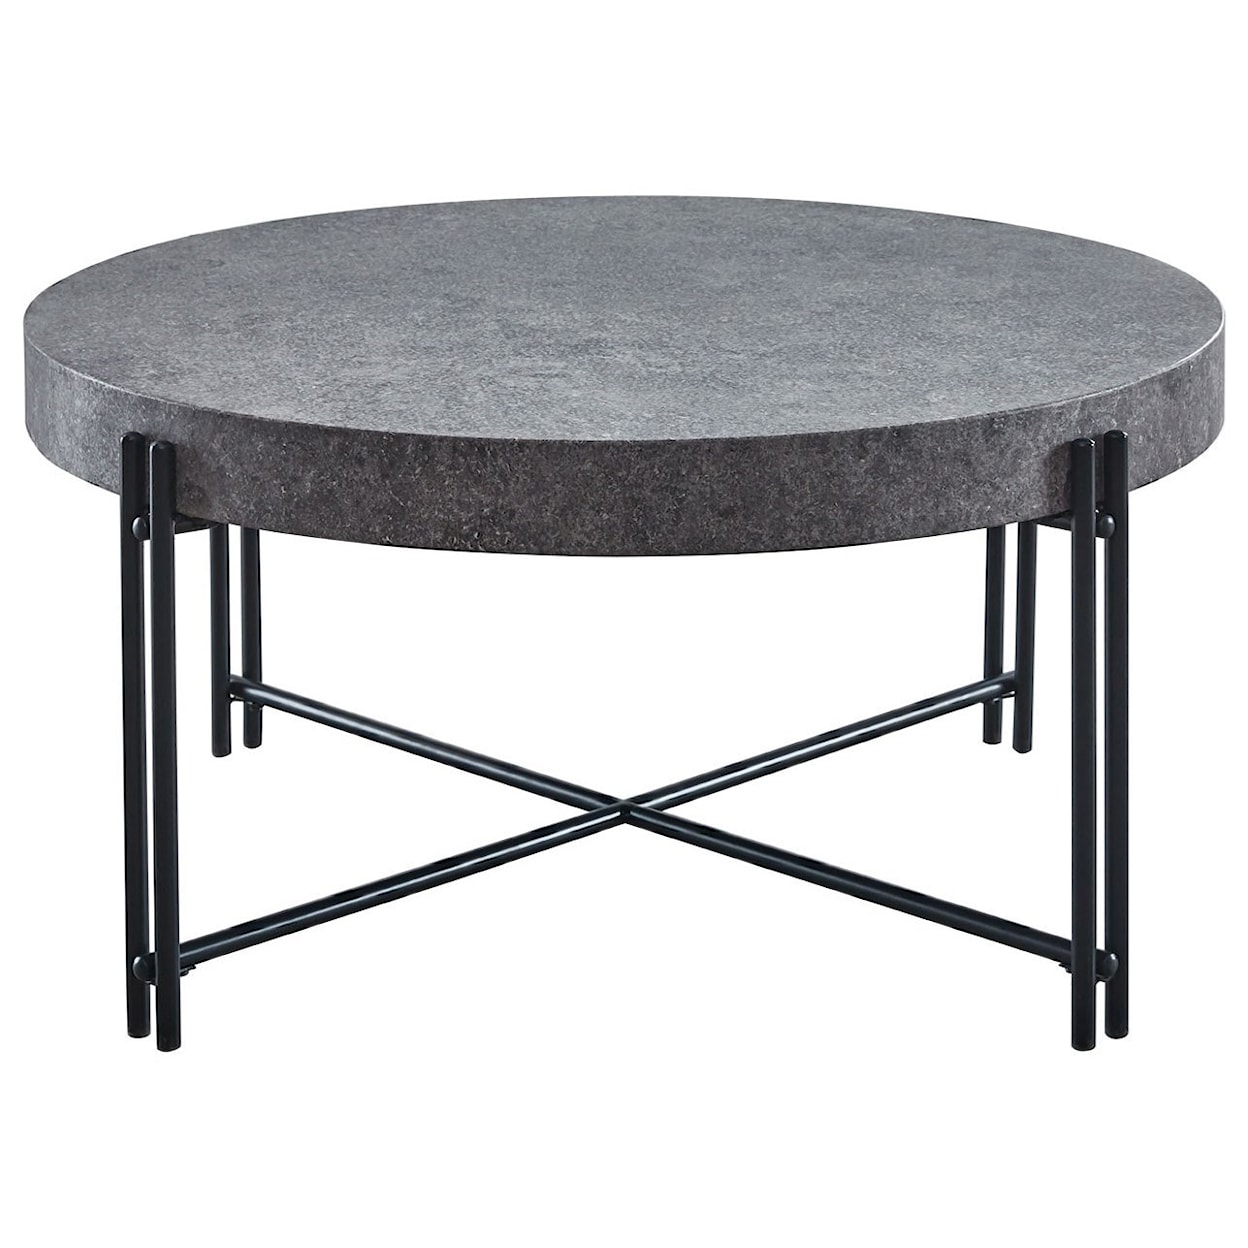 Steve Silver Morgan Round Cocktail Table